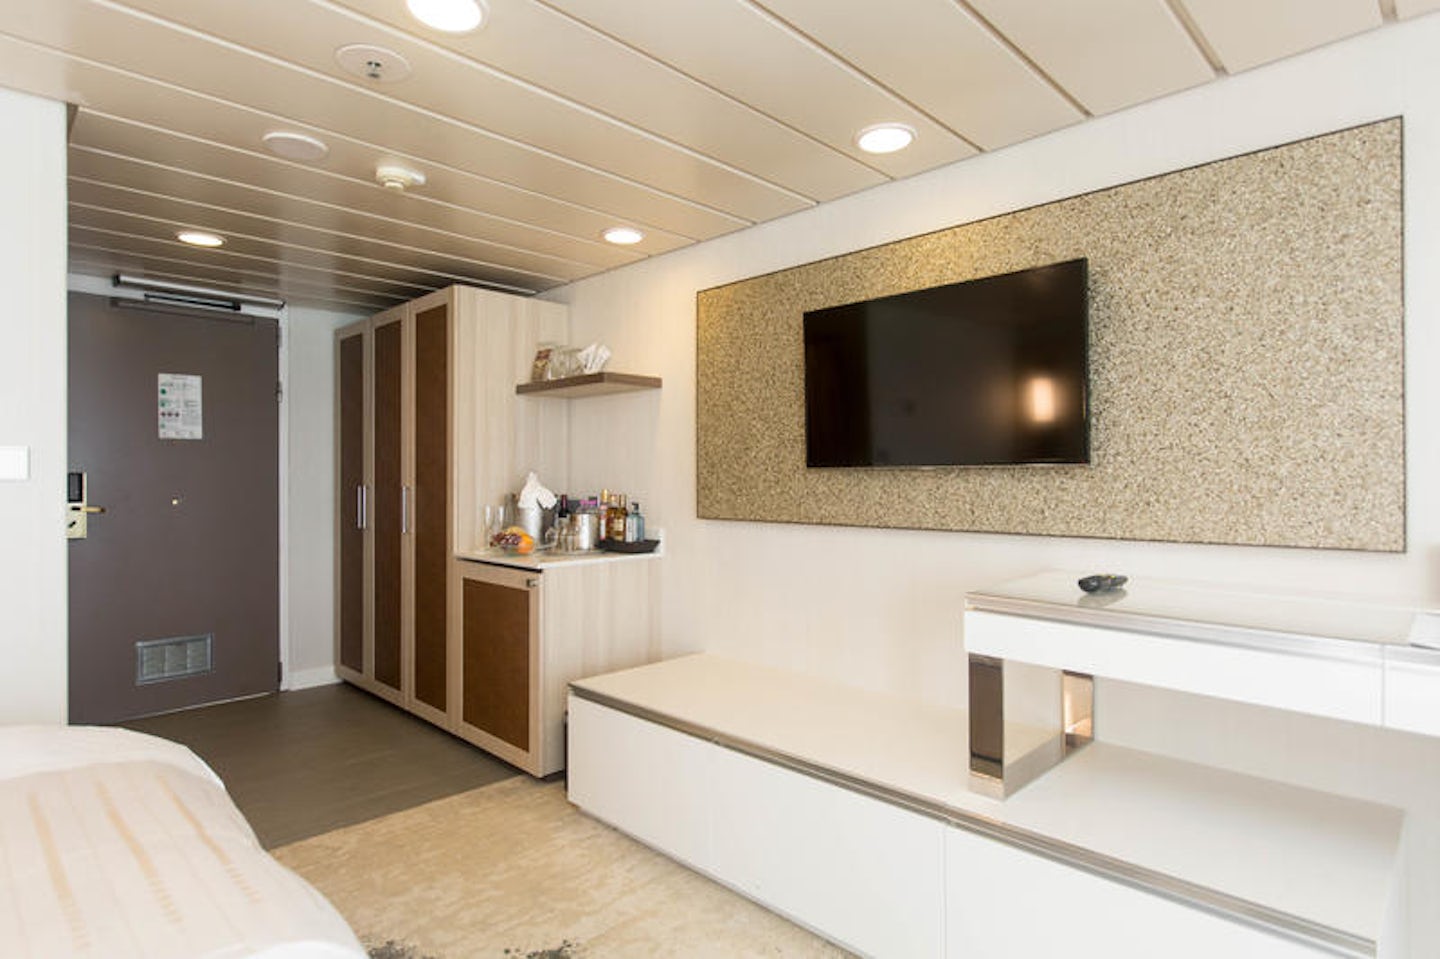 The Accessible Club Continent Suite on Azamara Journey